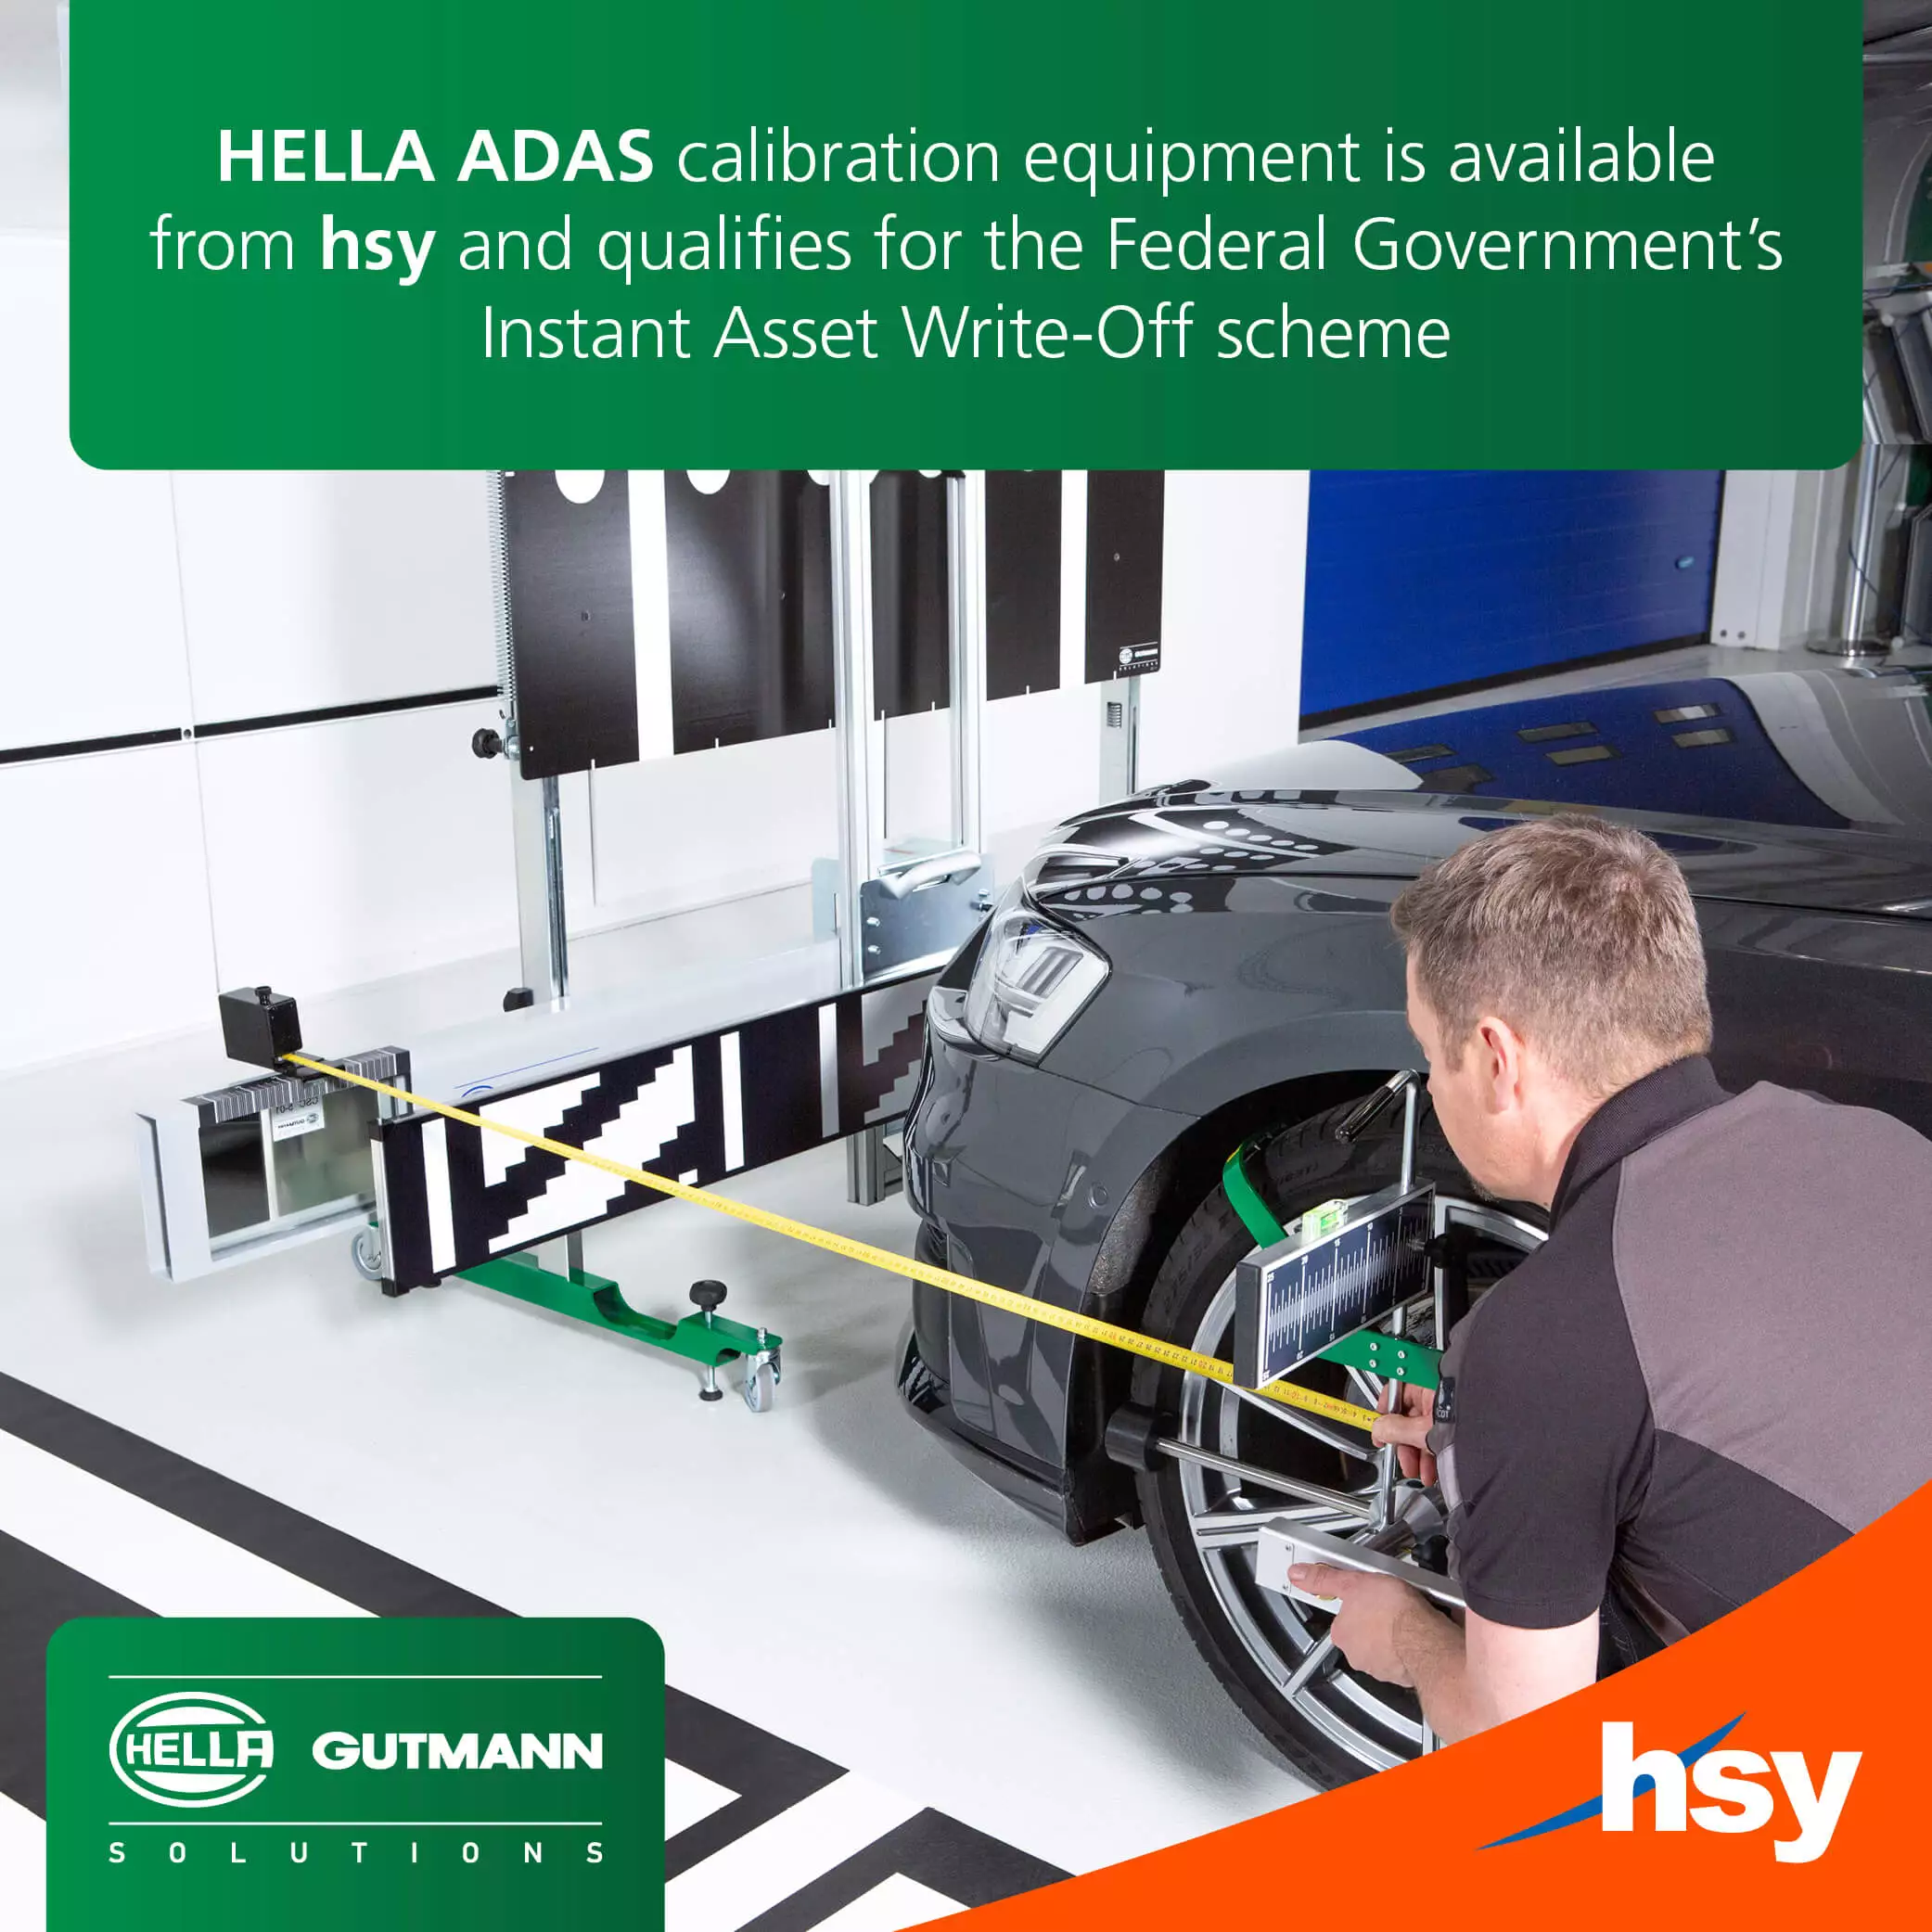 HELLA’S ADAS calibration equipment available from hsy